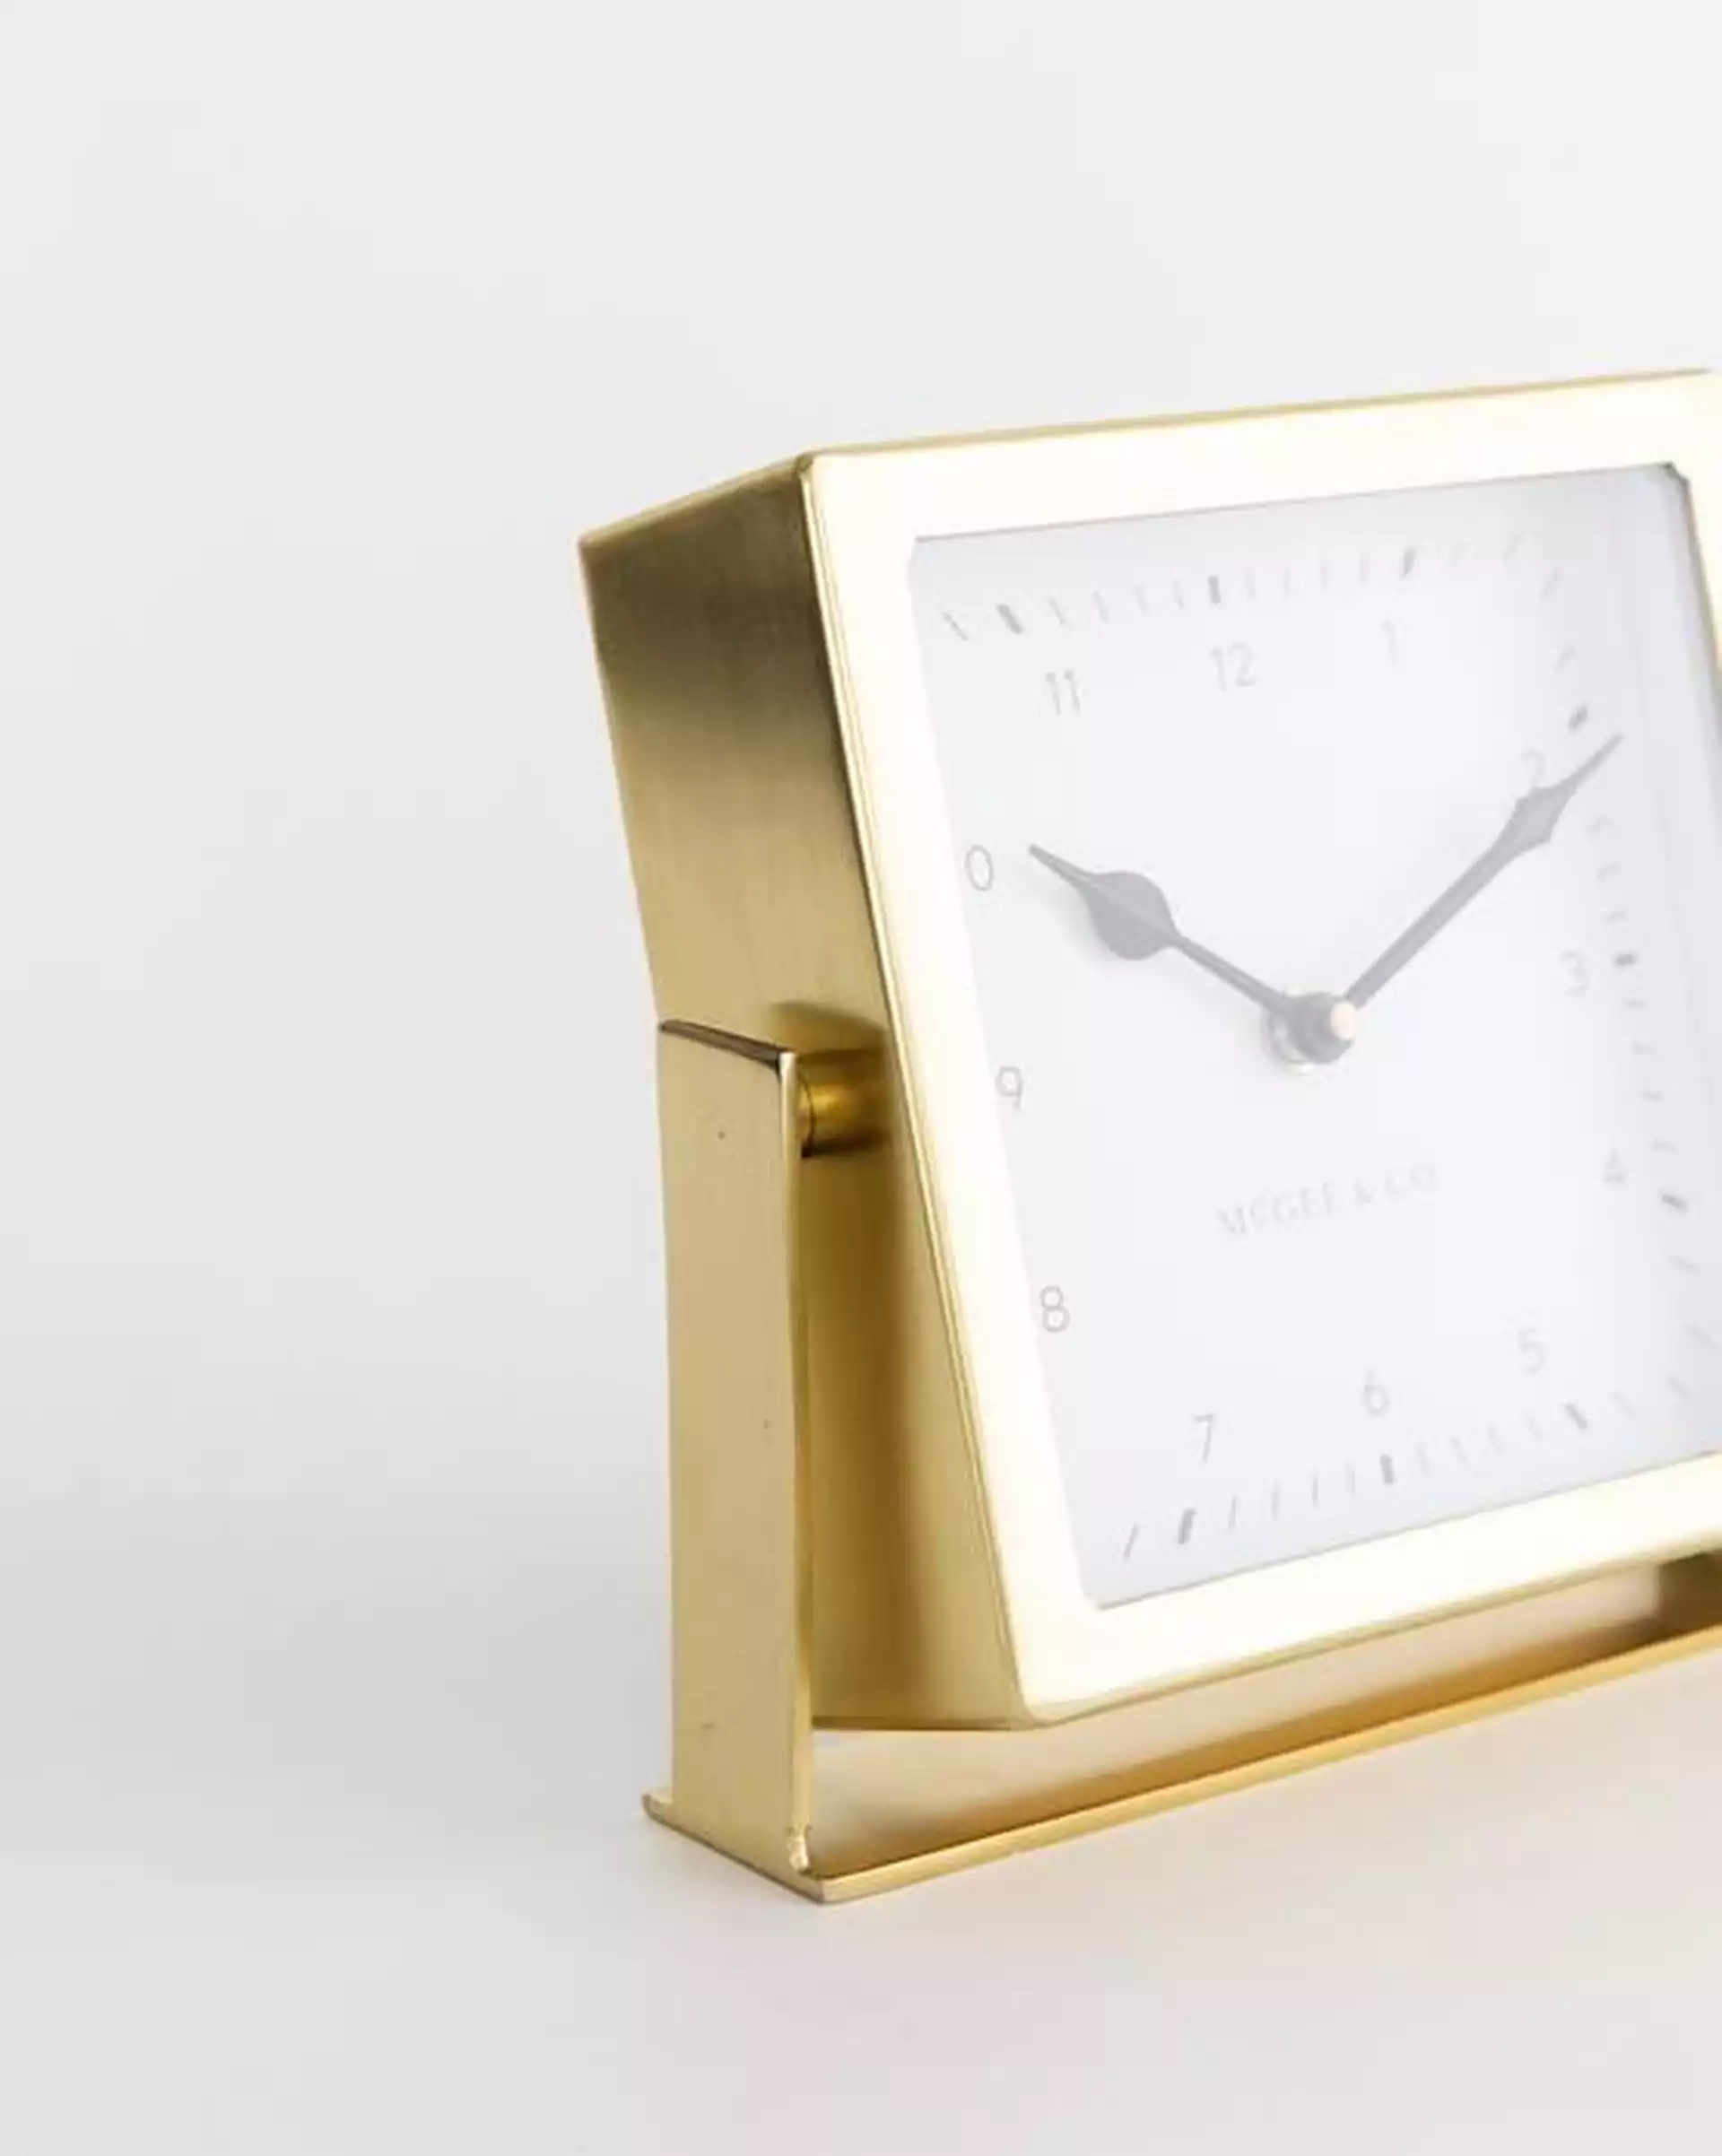 Posey Table Clock